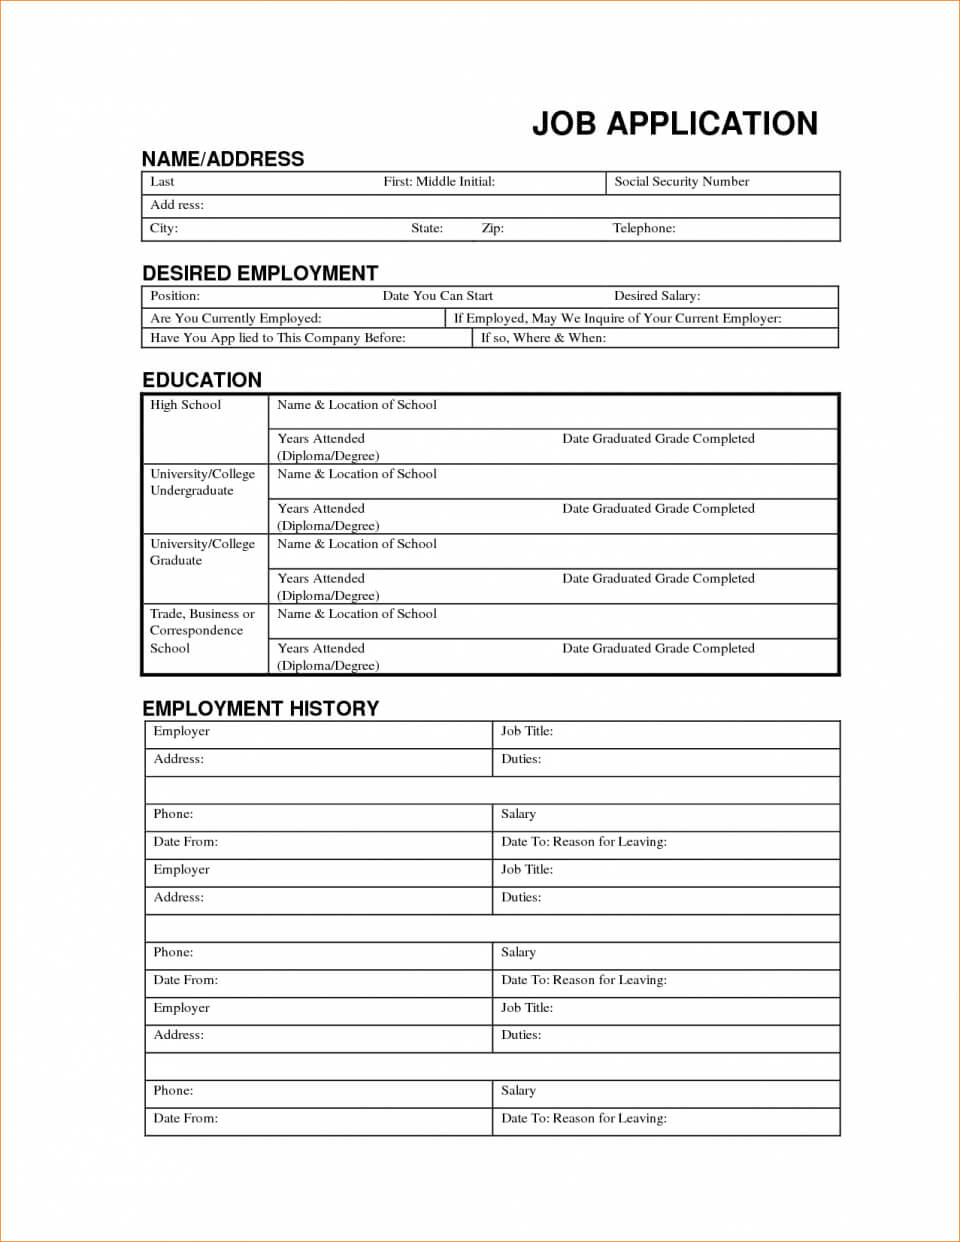 Resume Format Doc Or Pdf Valid Cv Template Microsoft Word For Employment Application Template Microsoft Word